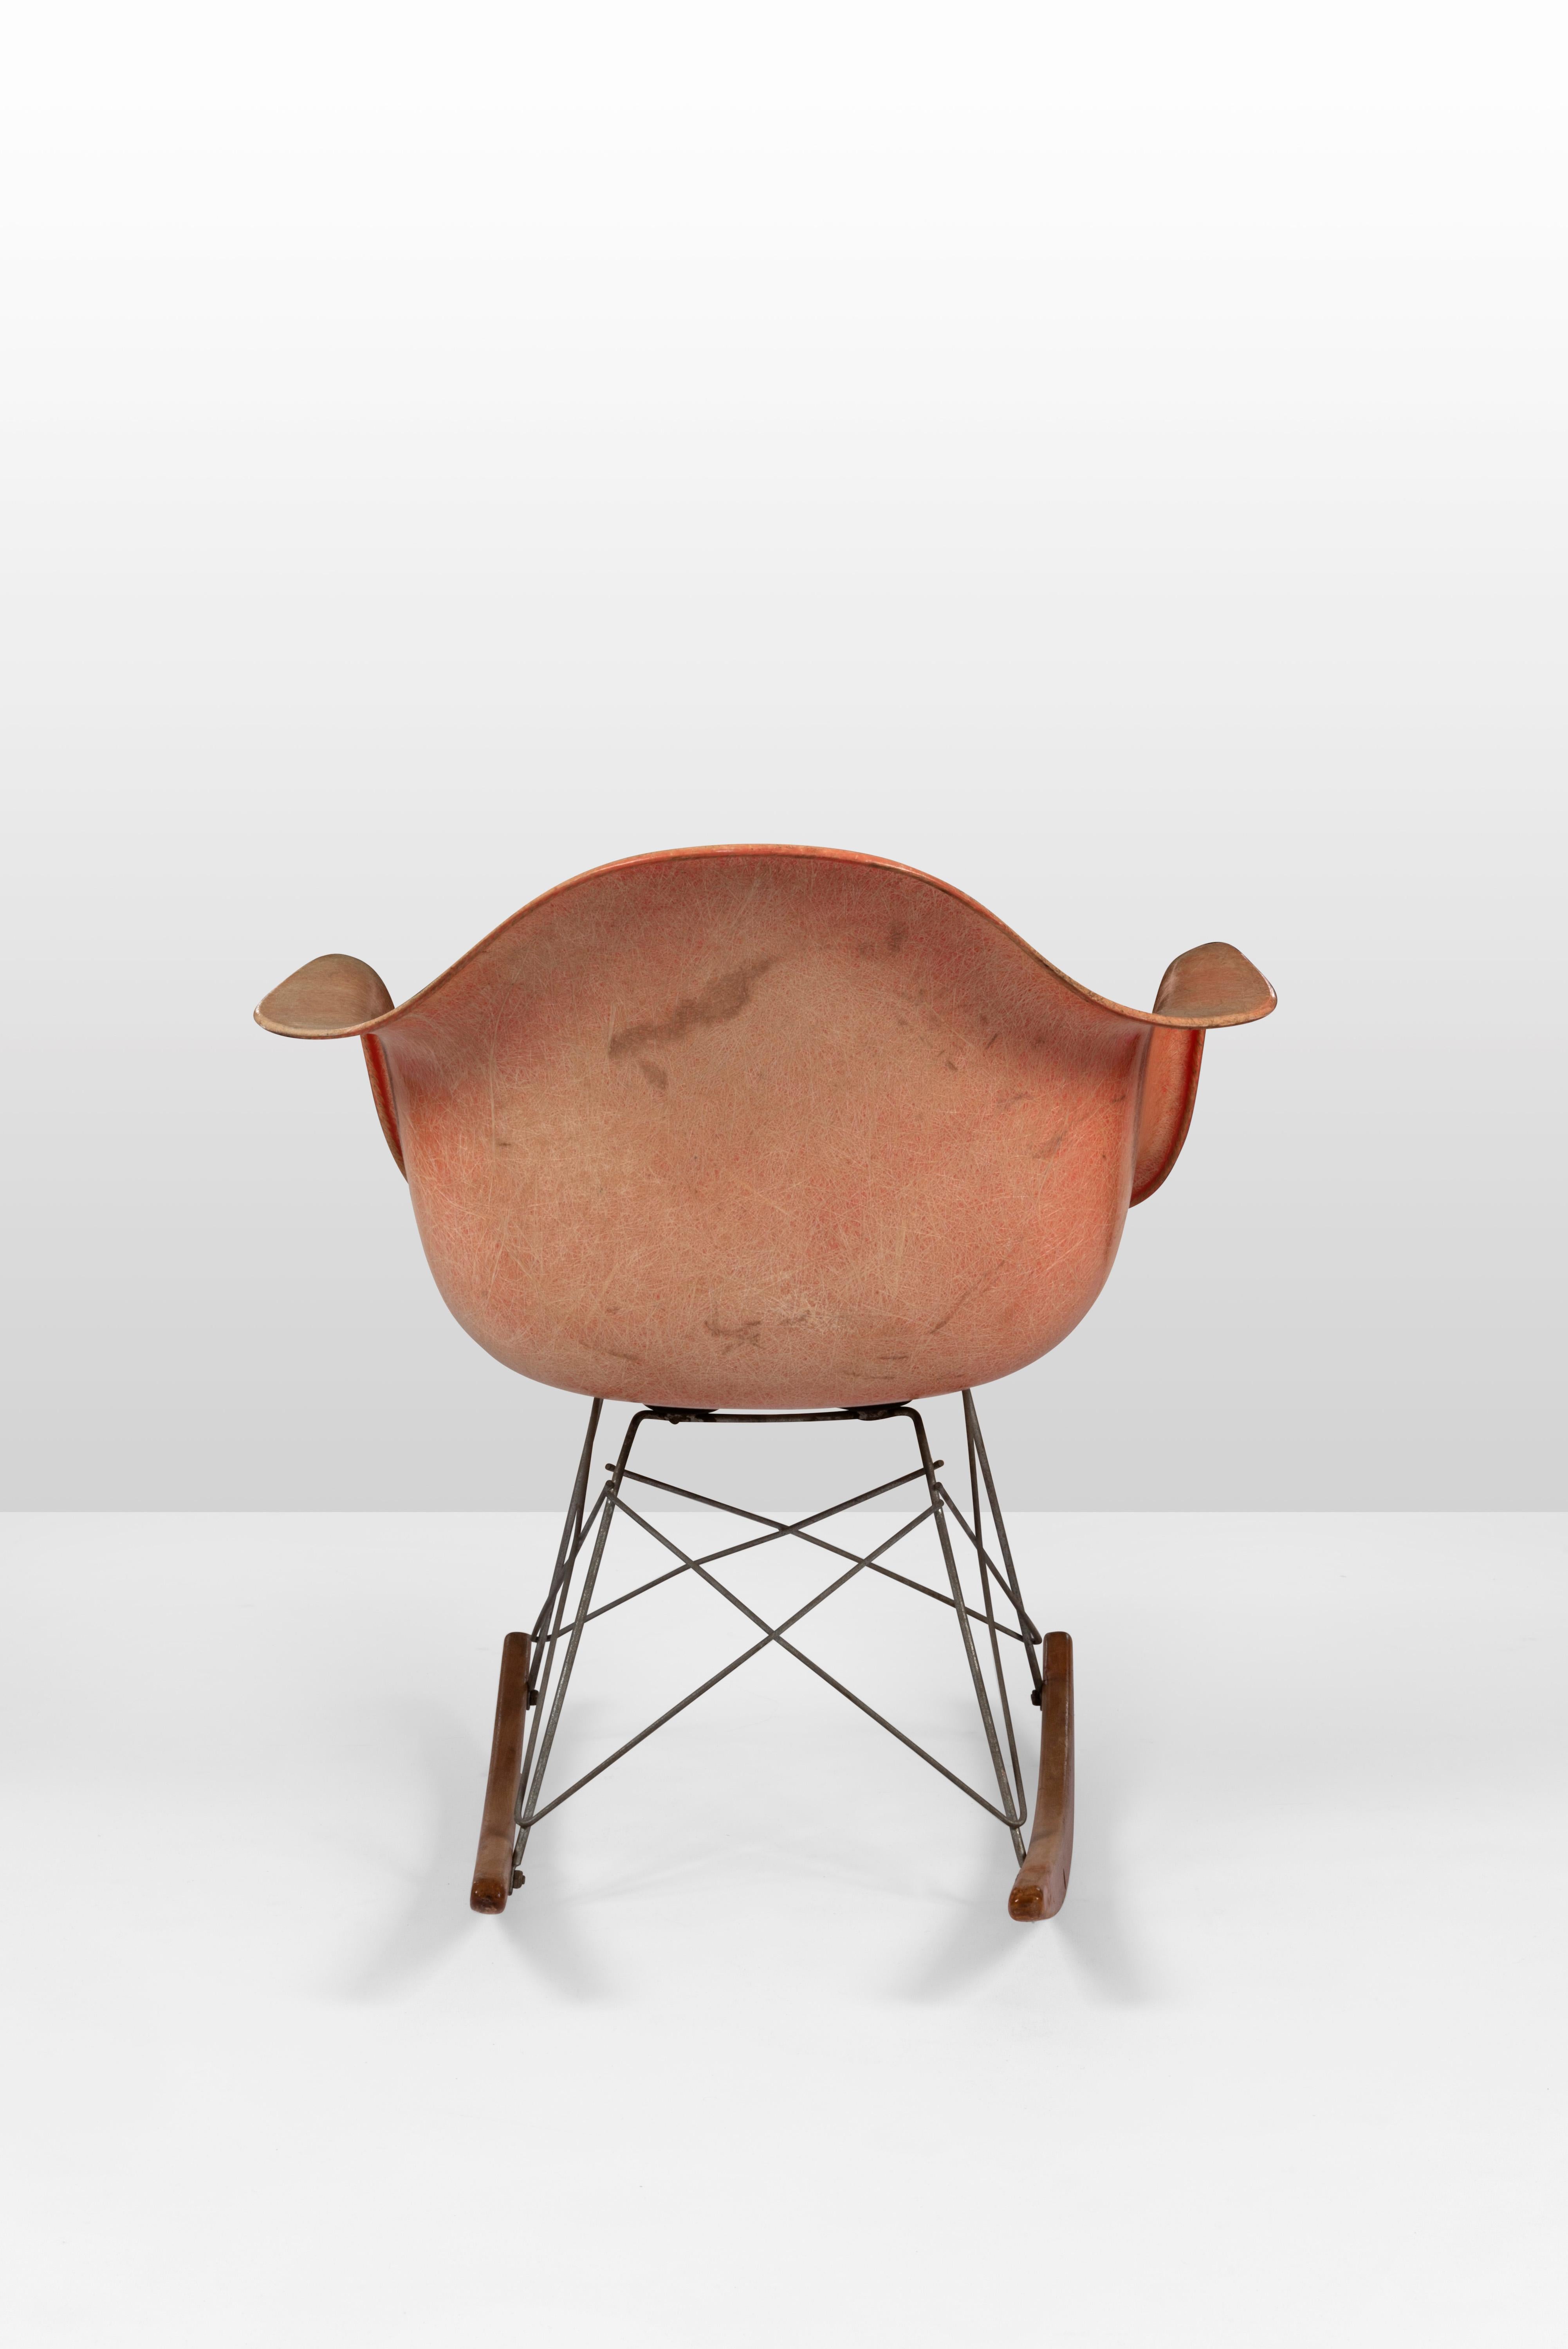 American RAR Rocking Chair by Charles & Ray Eames, 1950s For Sale